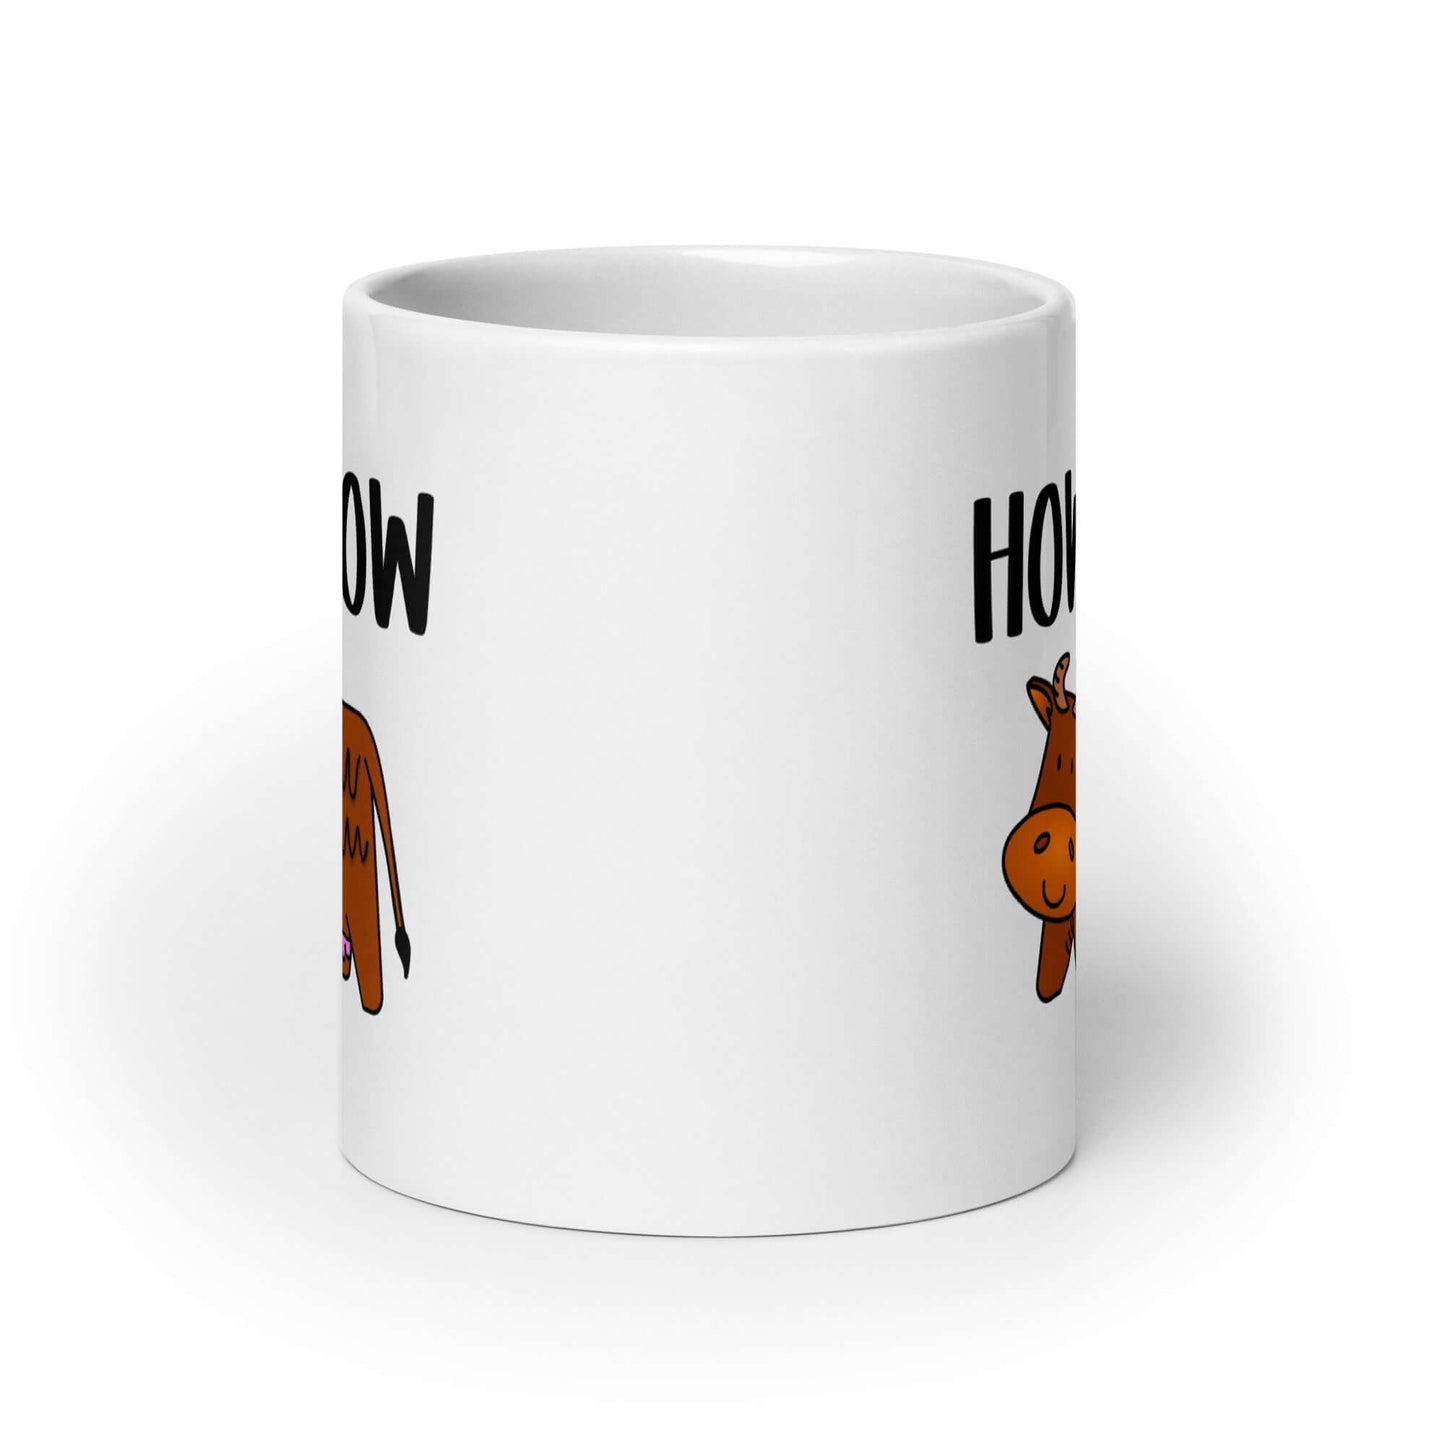 White ceramic mug with the words How now and an image of a brown cow printed on both sides.